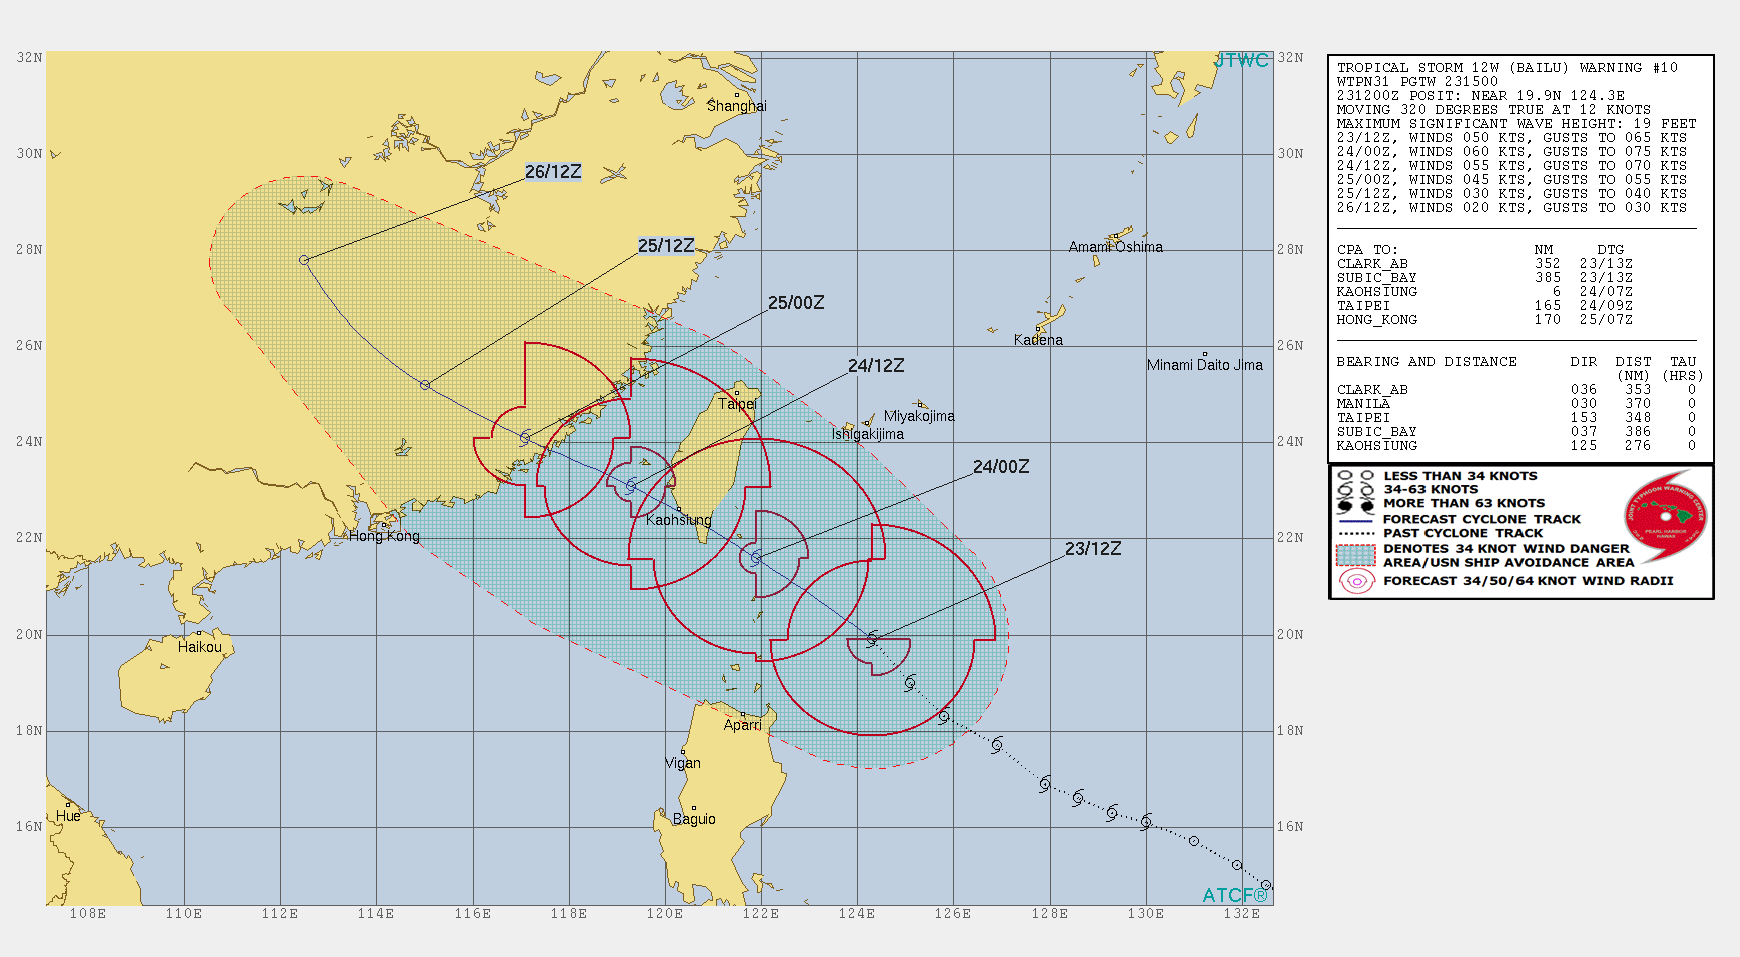 TS Bailu(12W) forecast to track over southern Taiwan shortly after 12h near minimal typhoon intensity